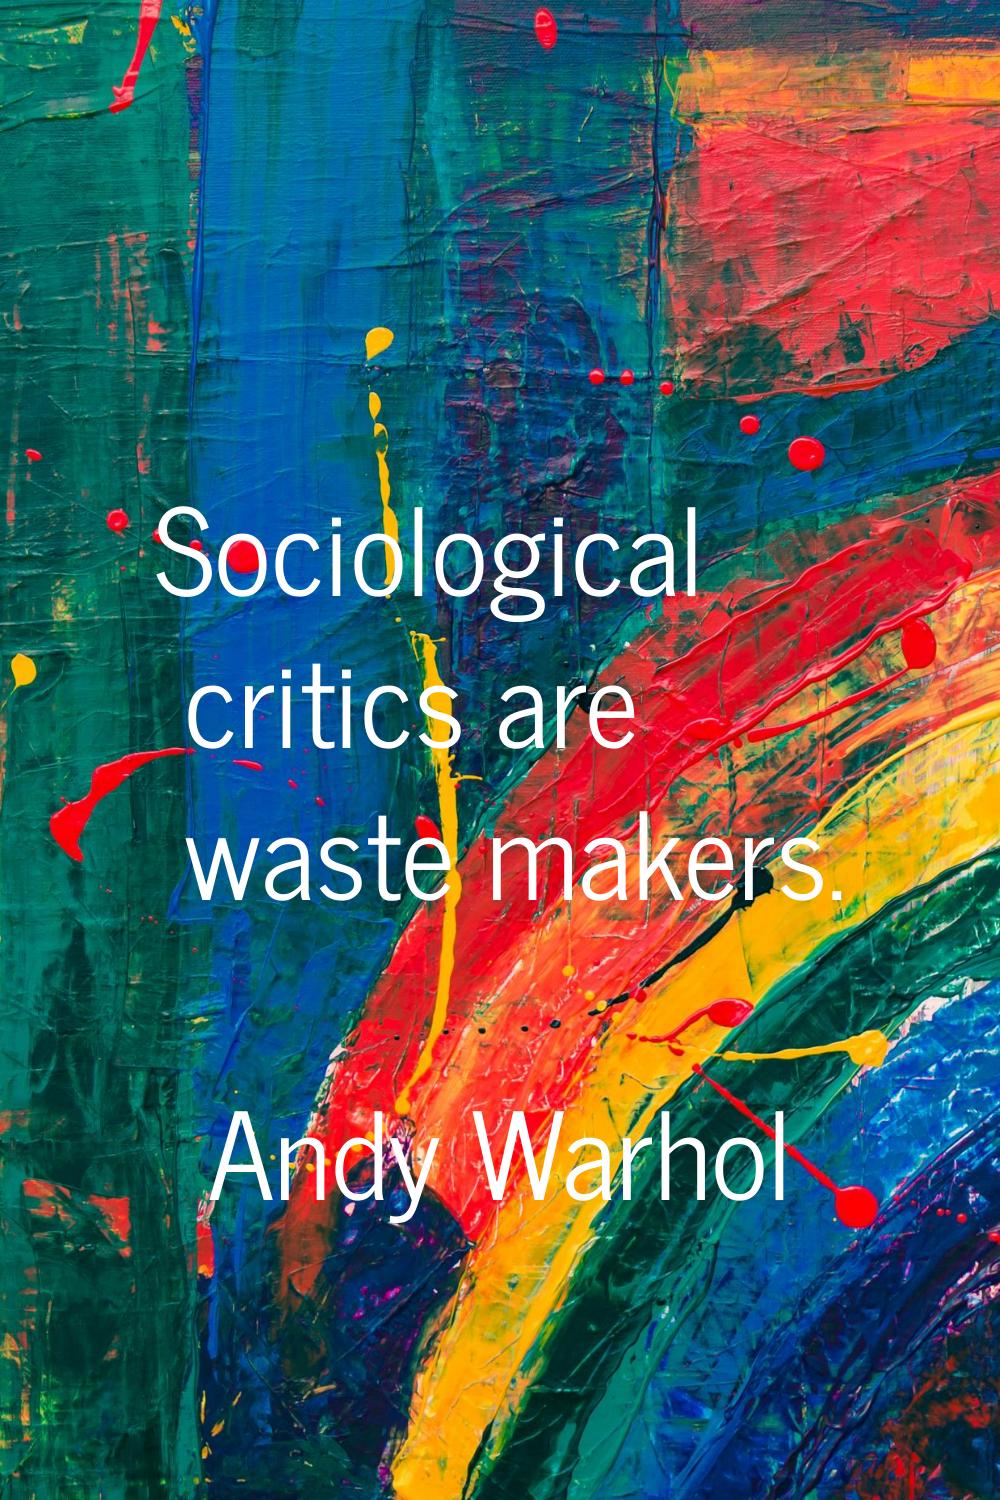 Sociological critics are waste makers.